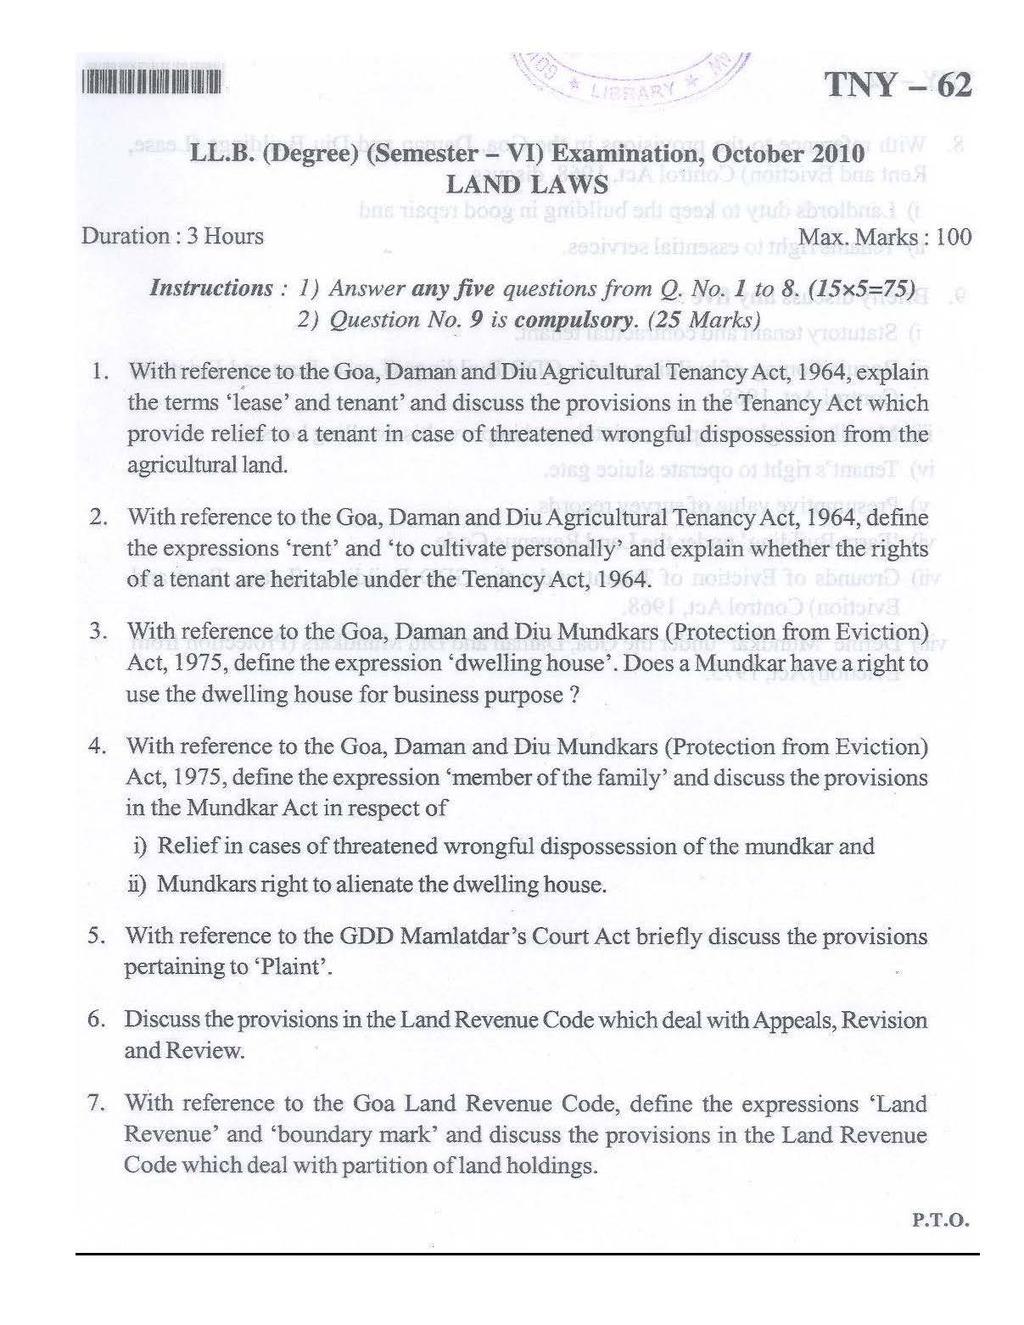 llllllllllllllllllllllllillllliiji. TNY -.62 LL.B. (Degree) (Semester- VI) Examinatio~, October 2010 LAND LAWS Duration : 3 Hours Max. Marks : l 00 Instructions : 1) Answer any five questions from Q.